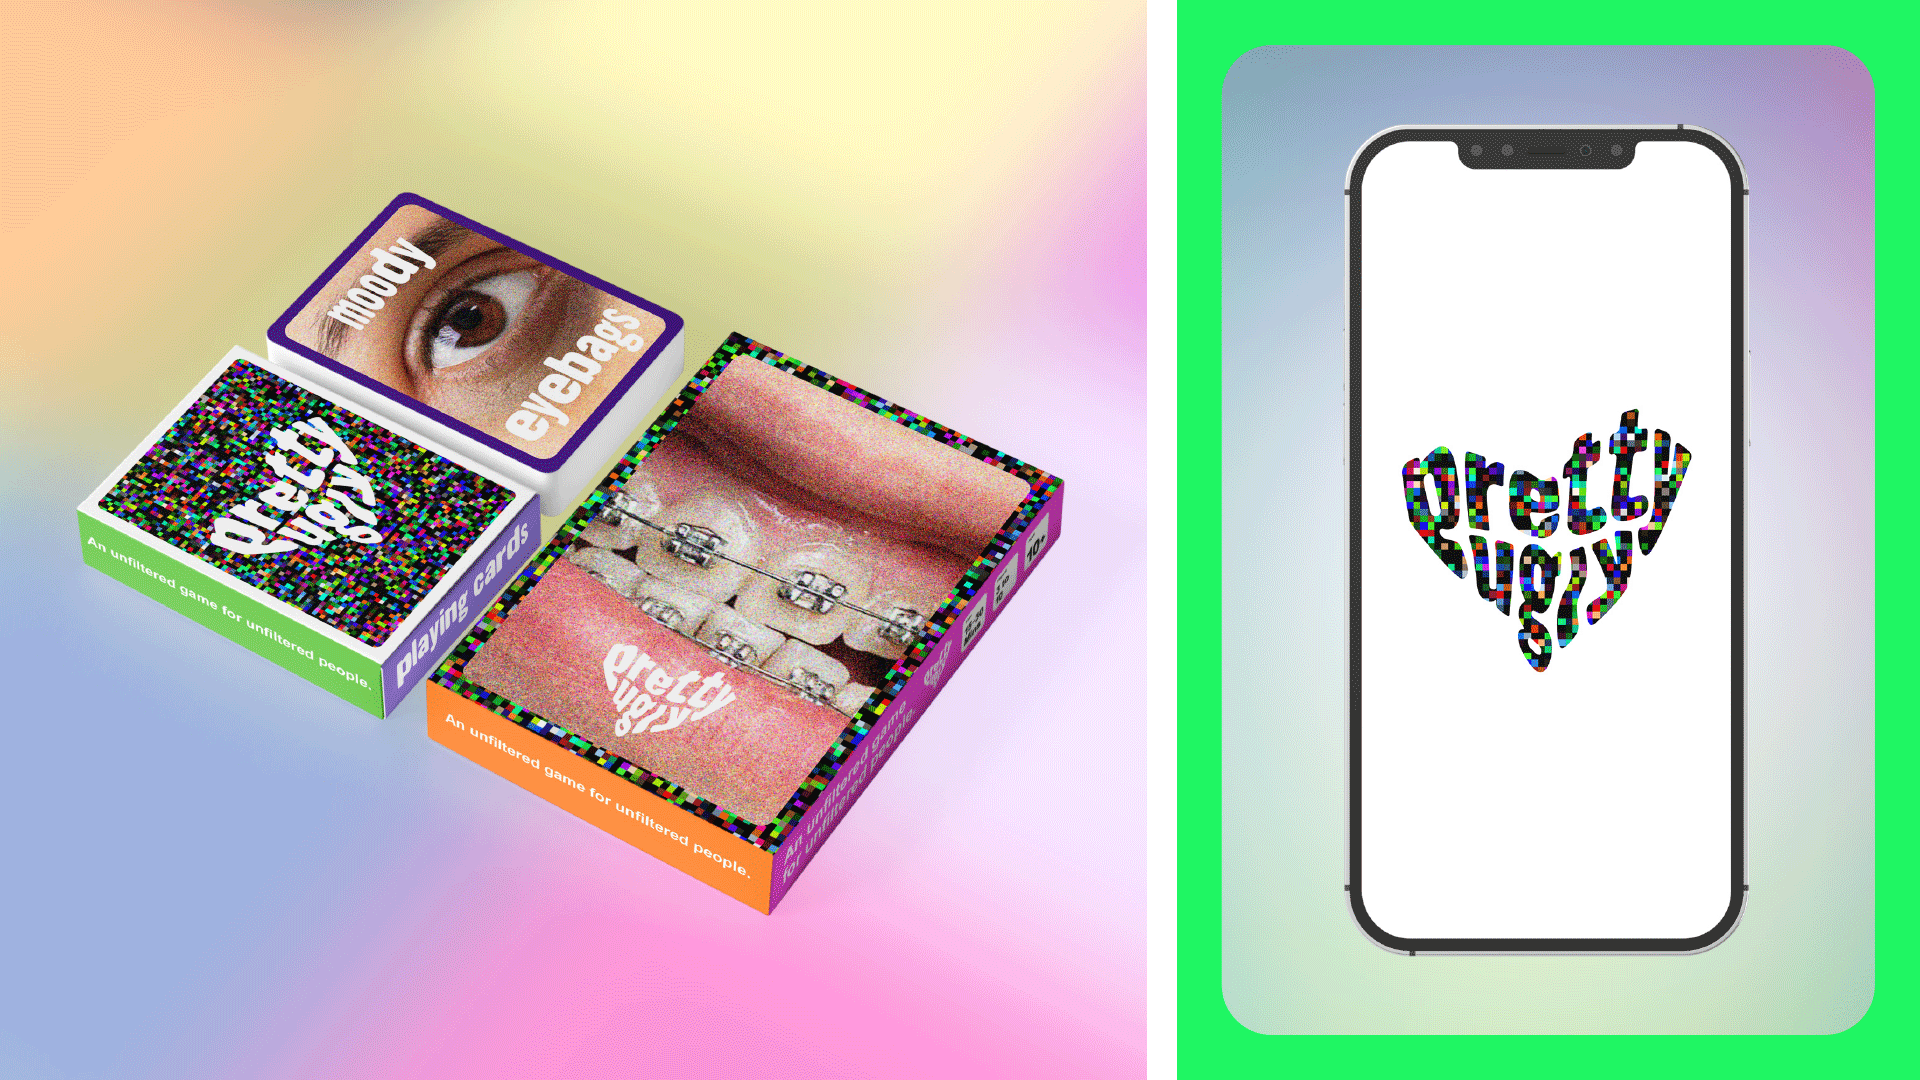 On the left is packaging for the game’s prompt cards and playing cards. On the right, a GIF flips between Pretty Ugly’s logo and its Instagram page.